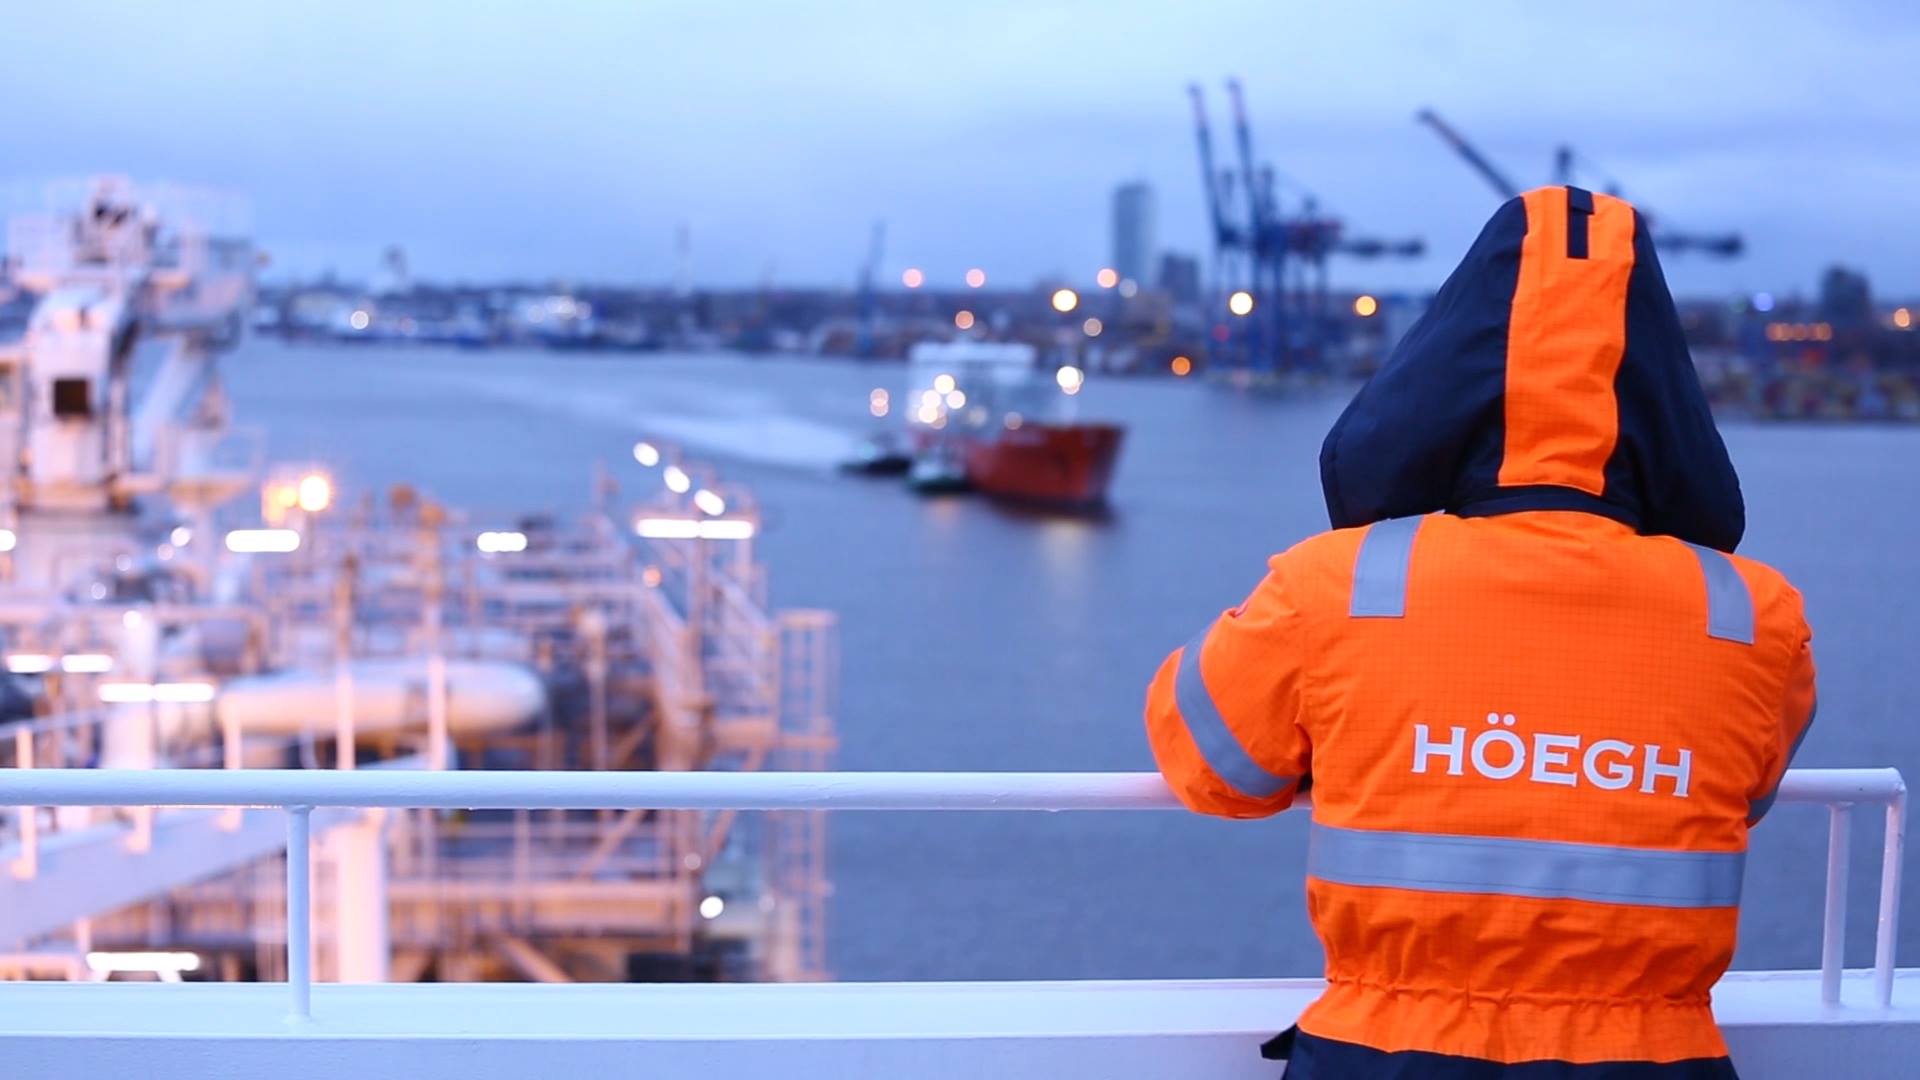 Sveinung Stohle to leave Hoegh LNG after 15 years as CEO